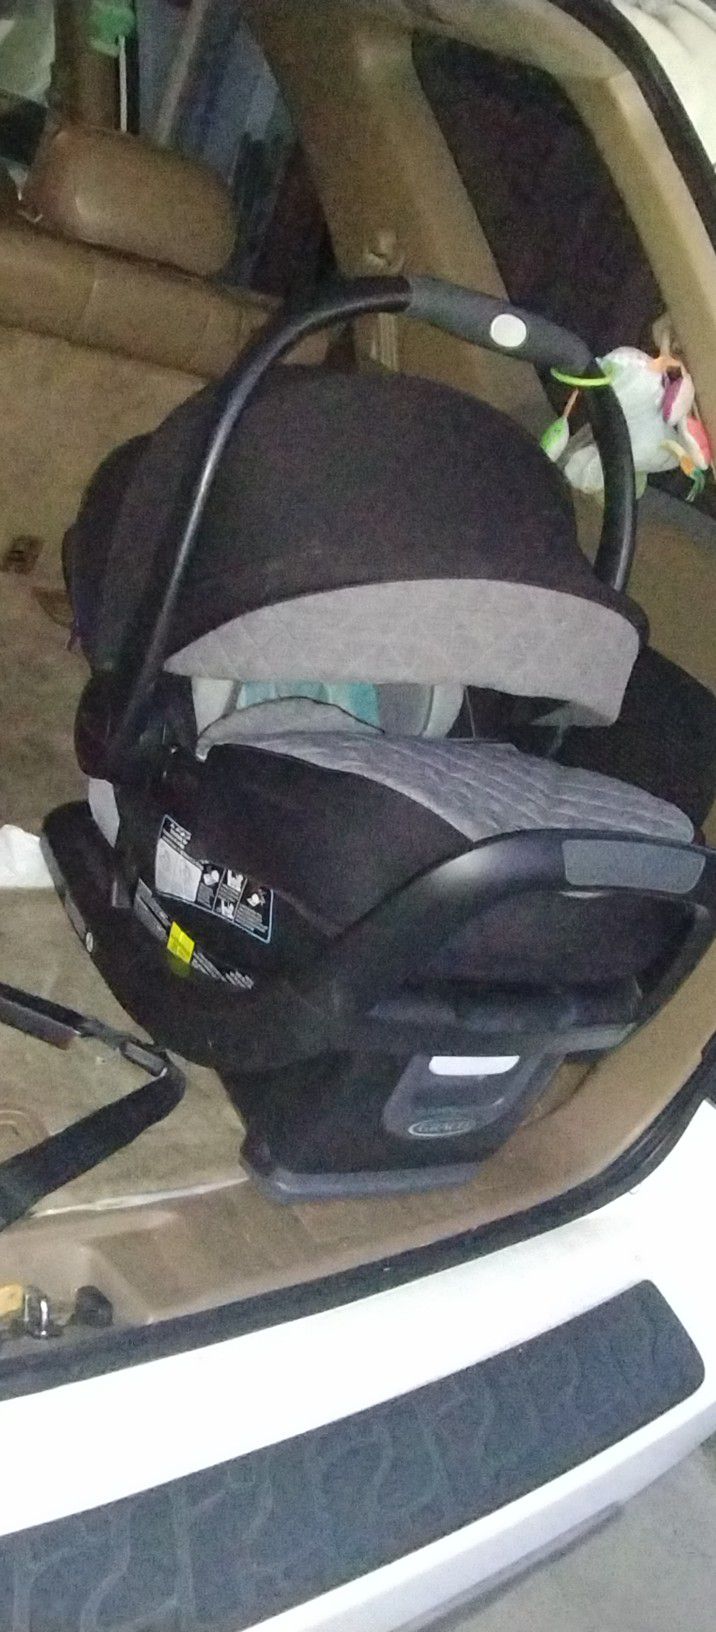 Car Seat Graco And Matching Play Yard As Well